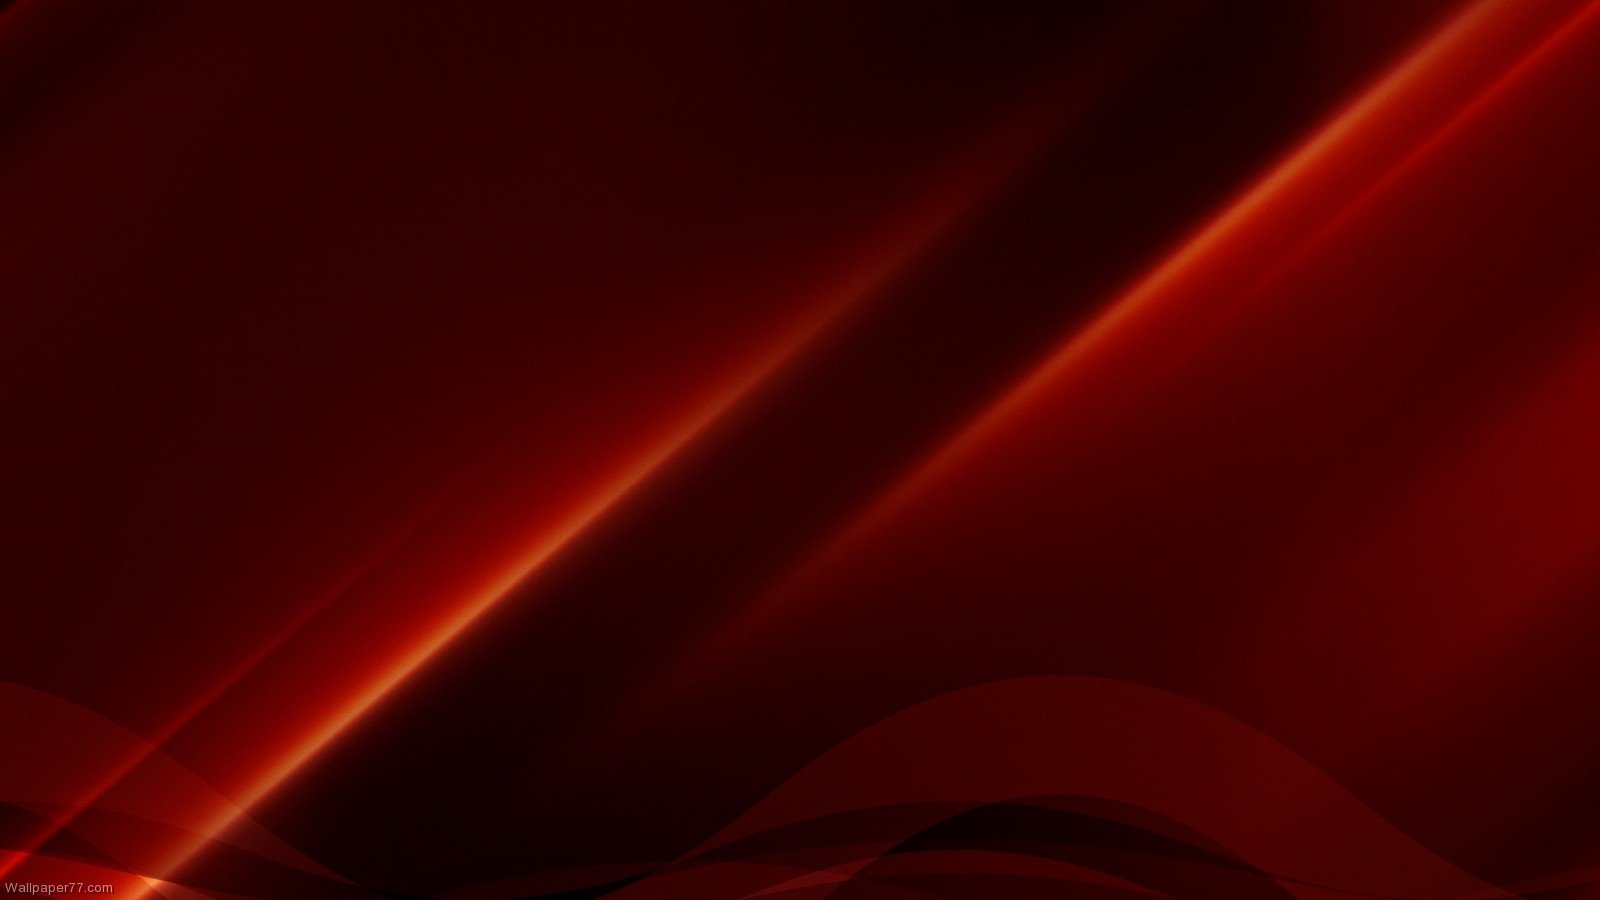  Very Dark Red abstract wallpapers illusions polish shape abstract 1600x900